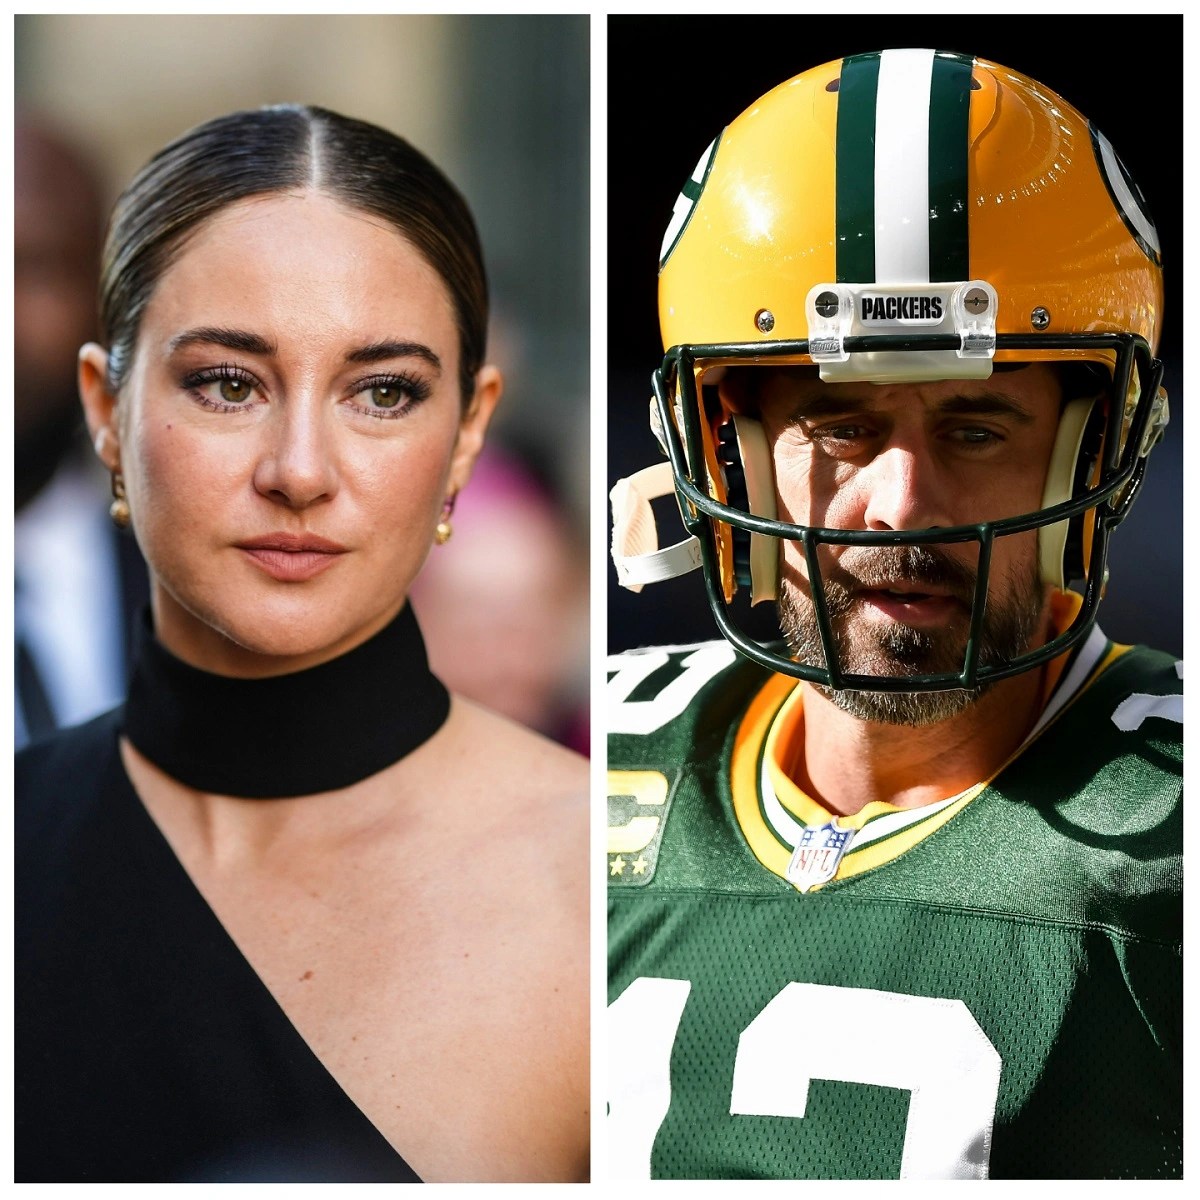 Shailene Woodley Opens up About How Difficult It Was for Her to Date Someone Like Aaron Rodgers